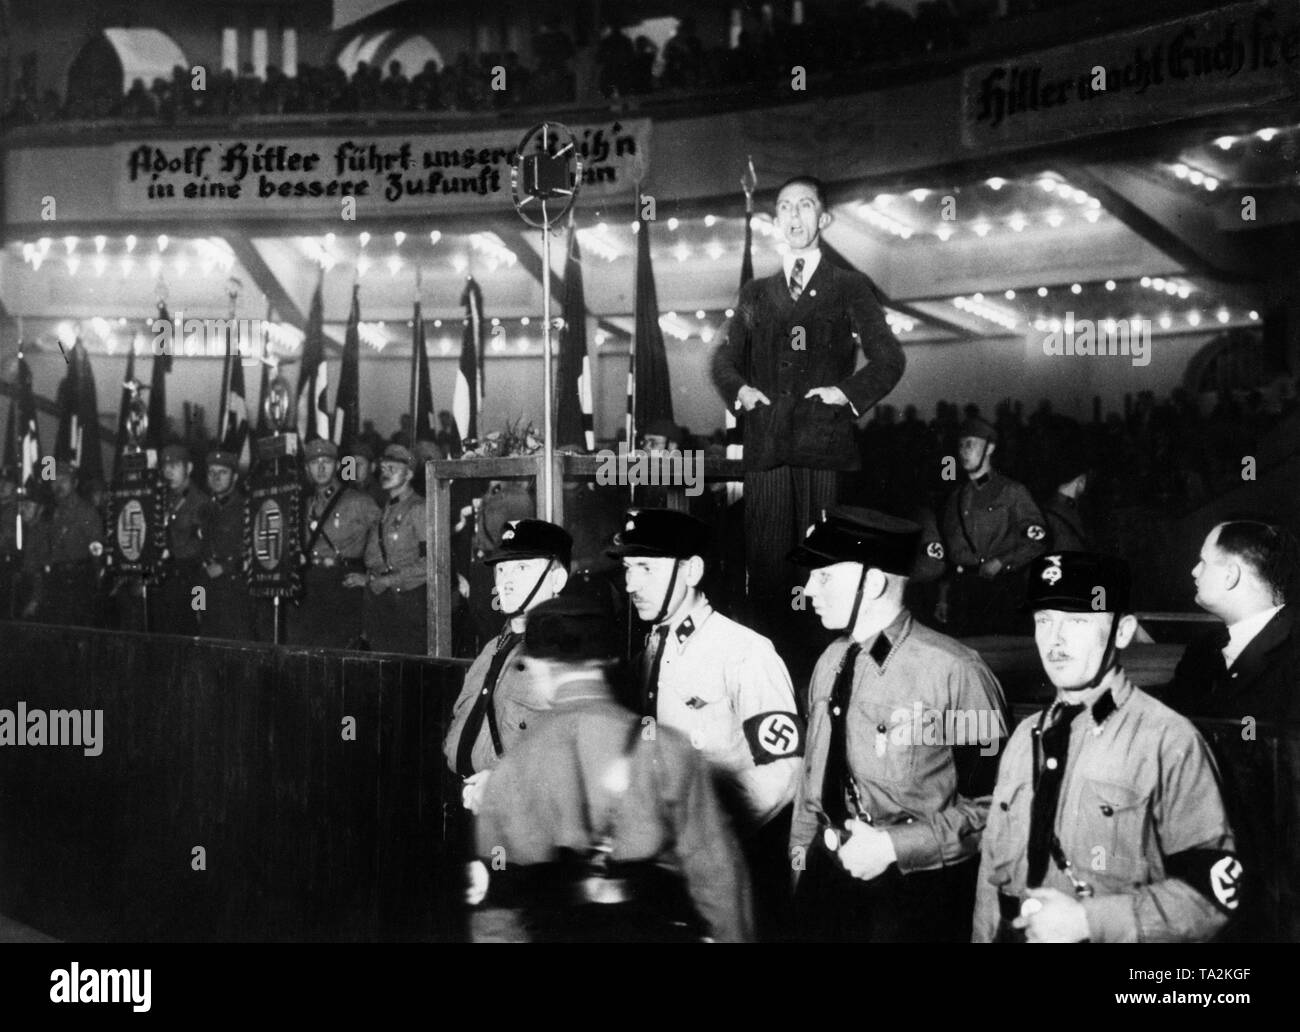 Joseph Goebbels holds a campaign speech at the Berlin Sports Palace during the Reichstag election campaign of 1932. Before him stands a group of SS men as personal stewards. The slogans on the banners read: 'Adolf Hitler leads our ranks into a better future ...' and 'Hitler makes you free'. Stock Photo